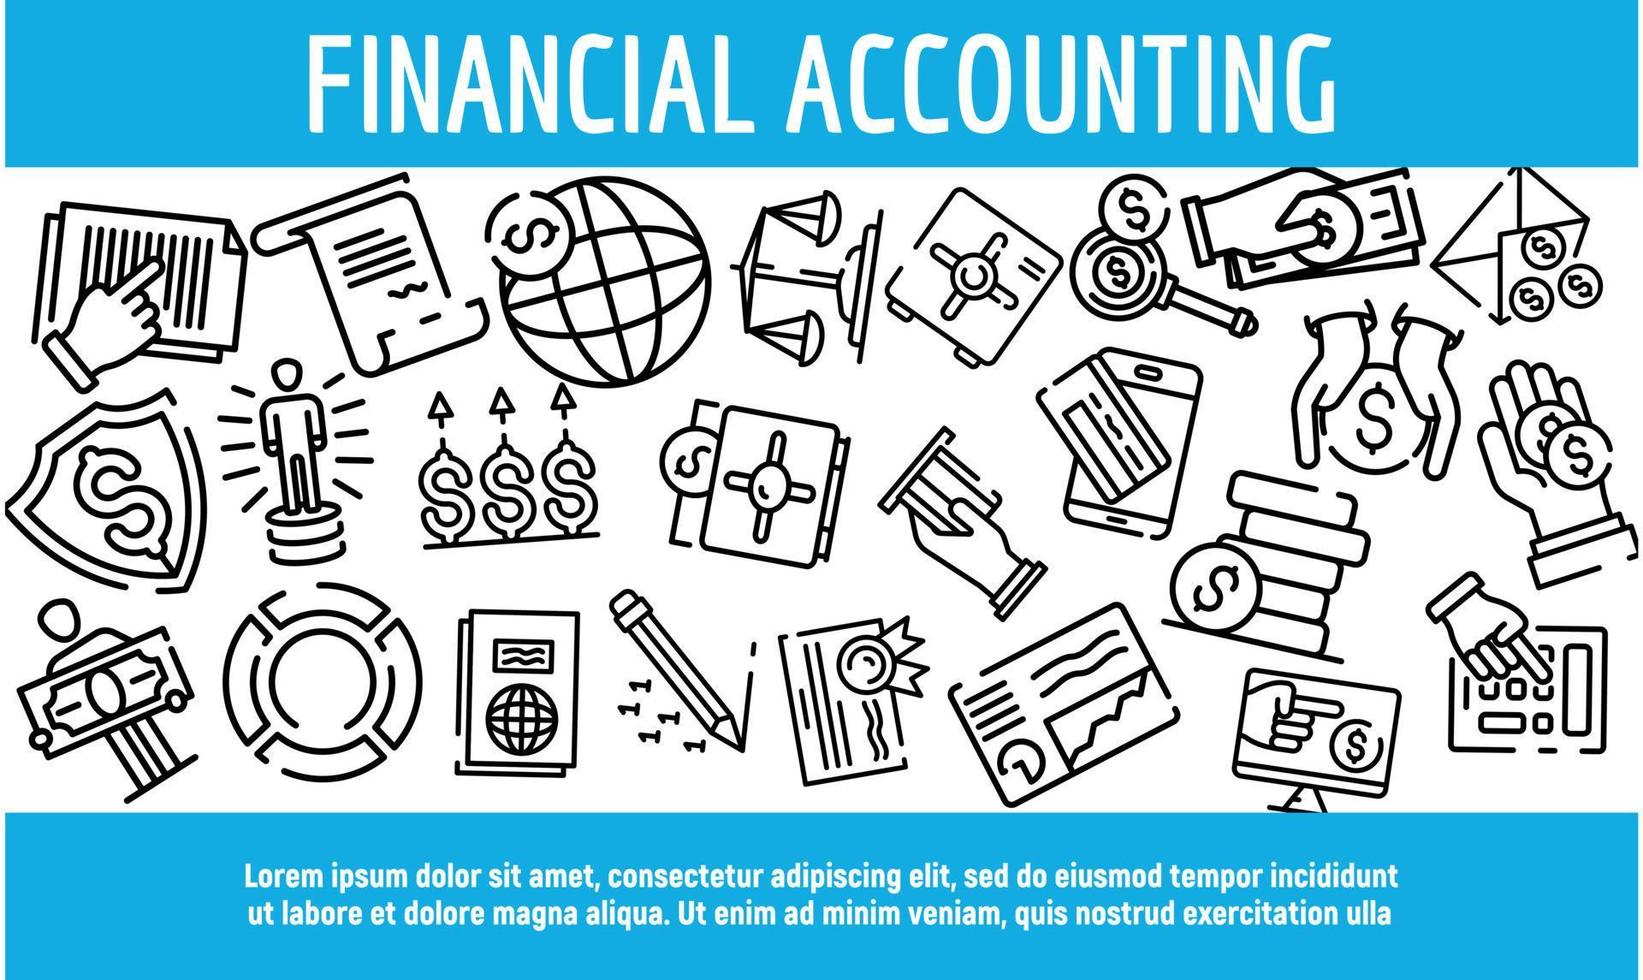 Financial accounting banner, outline style vector